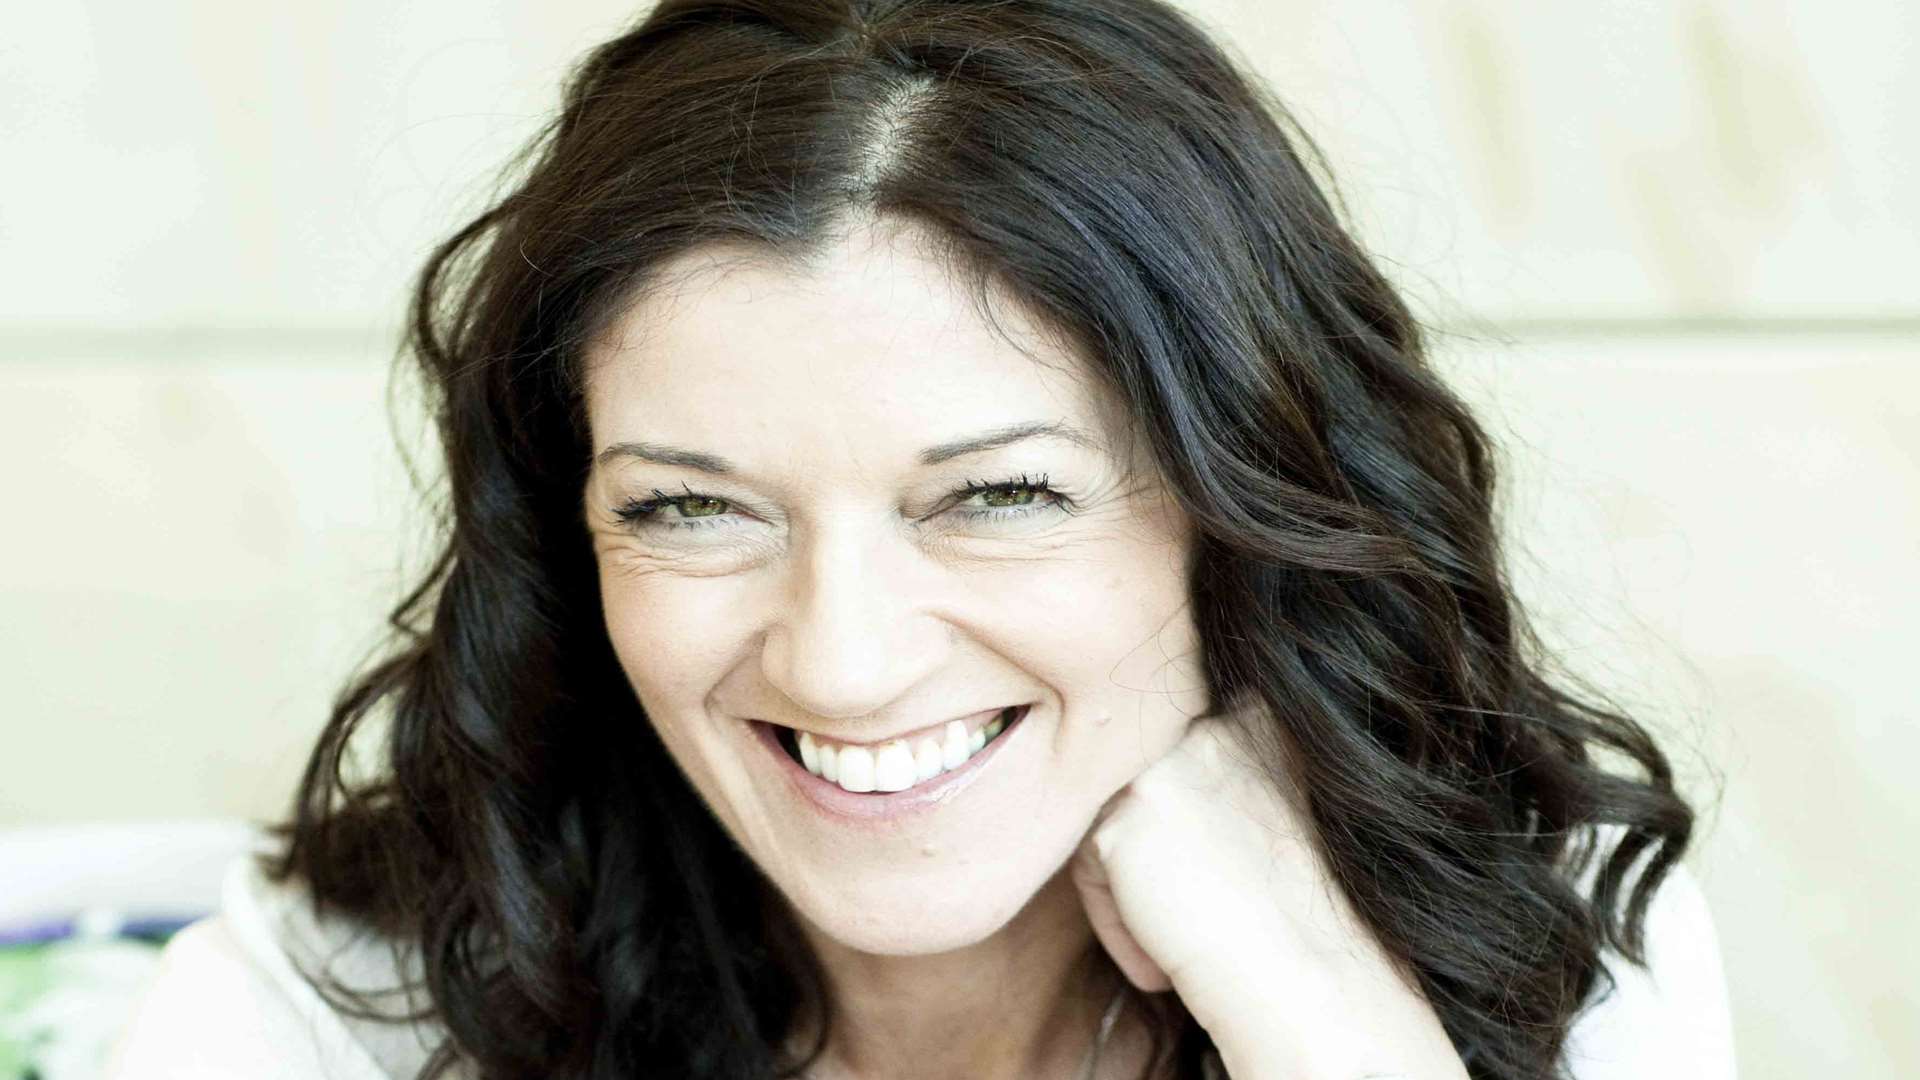 Author Victoria Hislop, who lives in Kent, will be talking about Greece at the Folkestone Book Festival